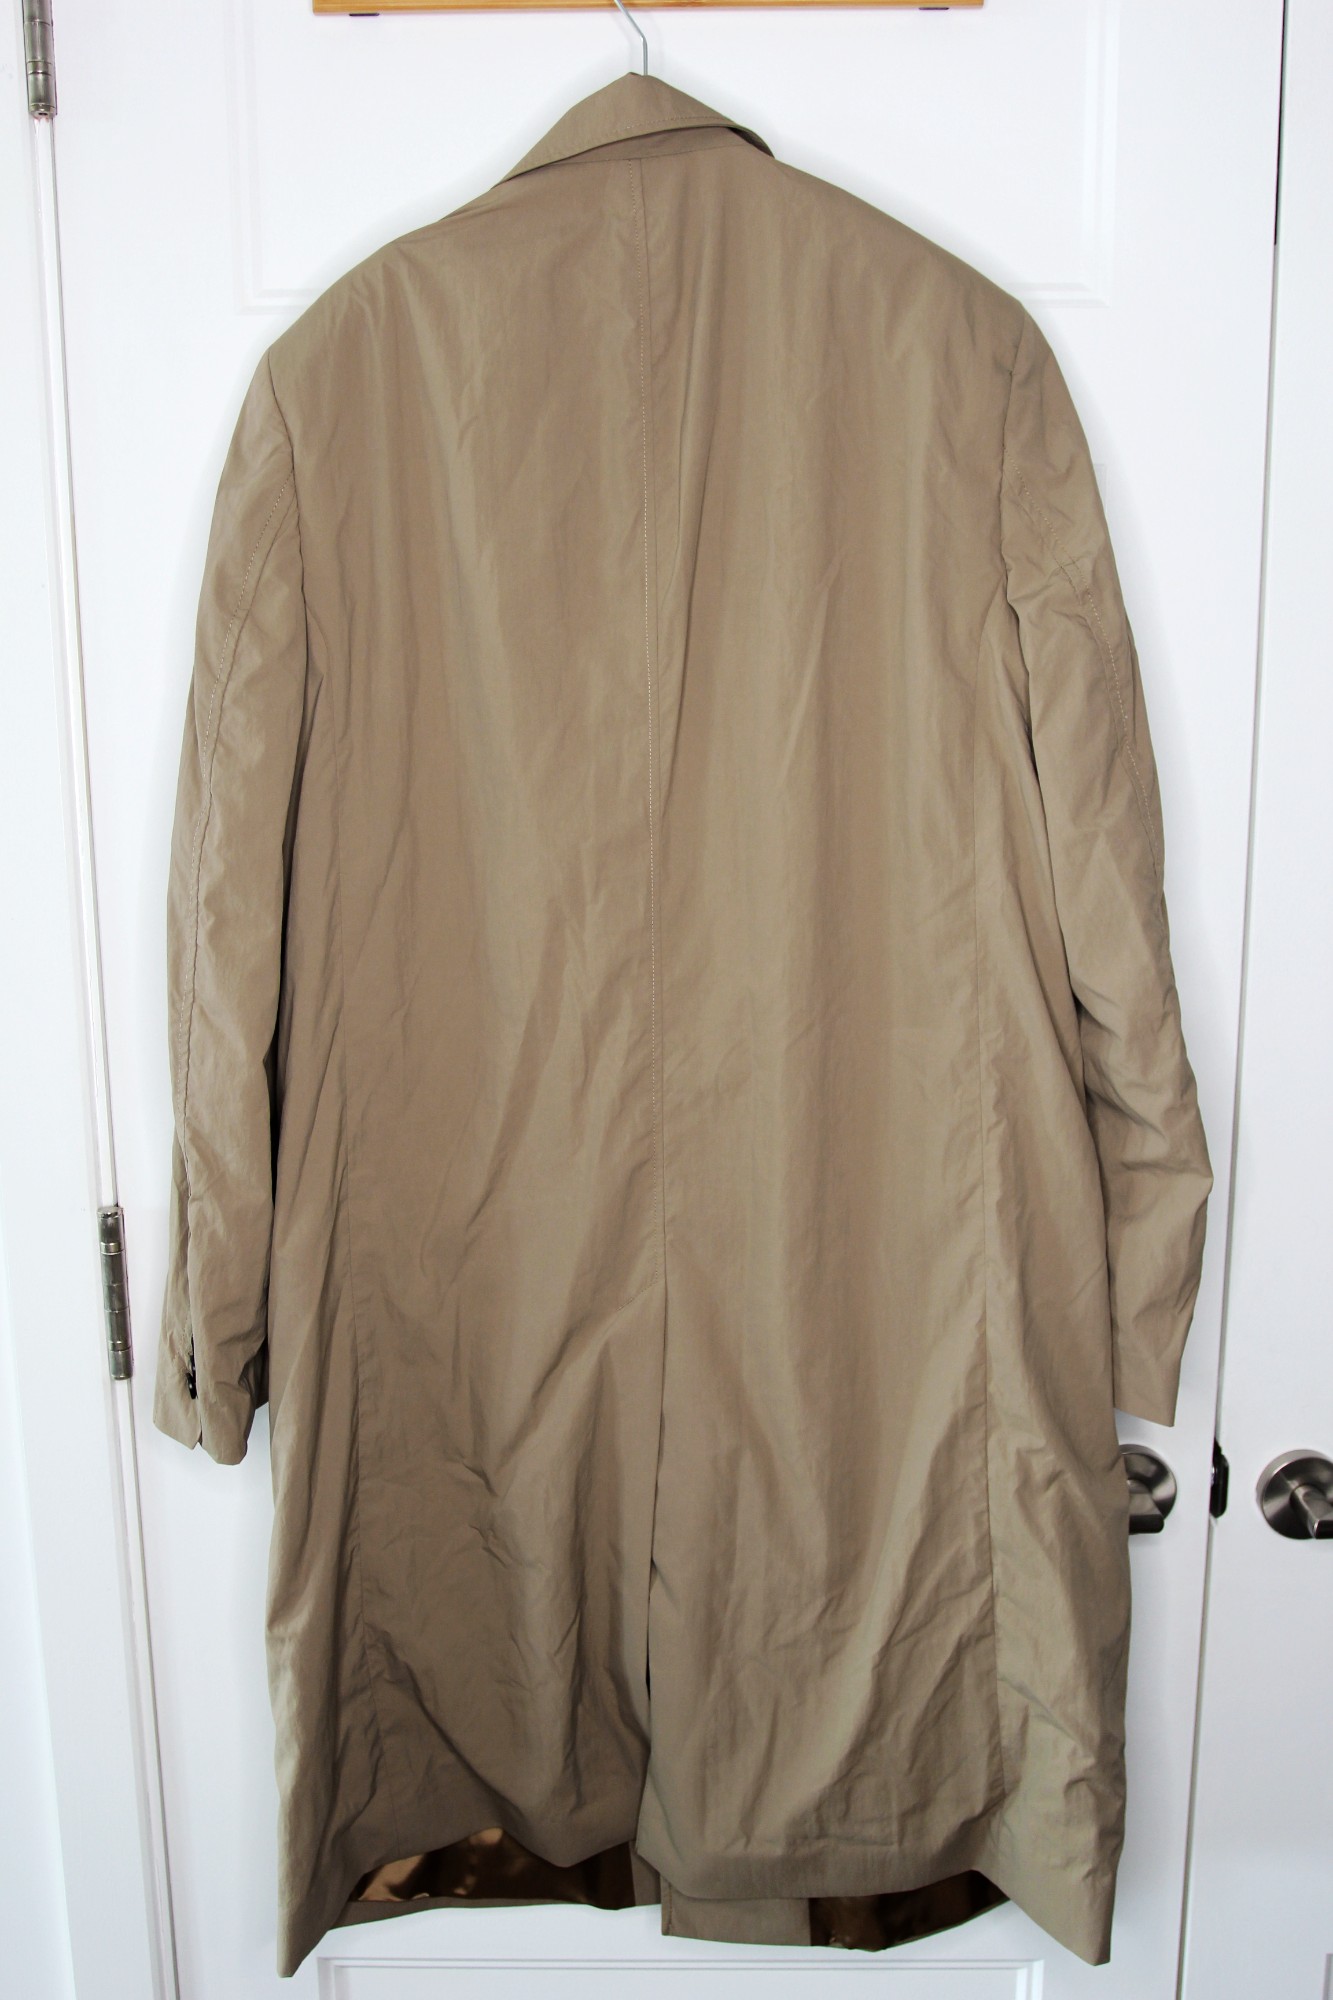 BNWT SS23 TIGER OF SWEDEN LONG TRENCH COAT 54 - 3